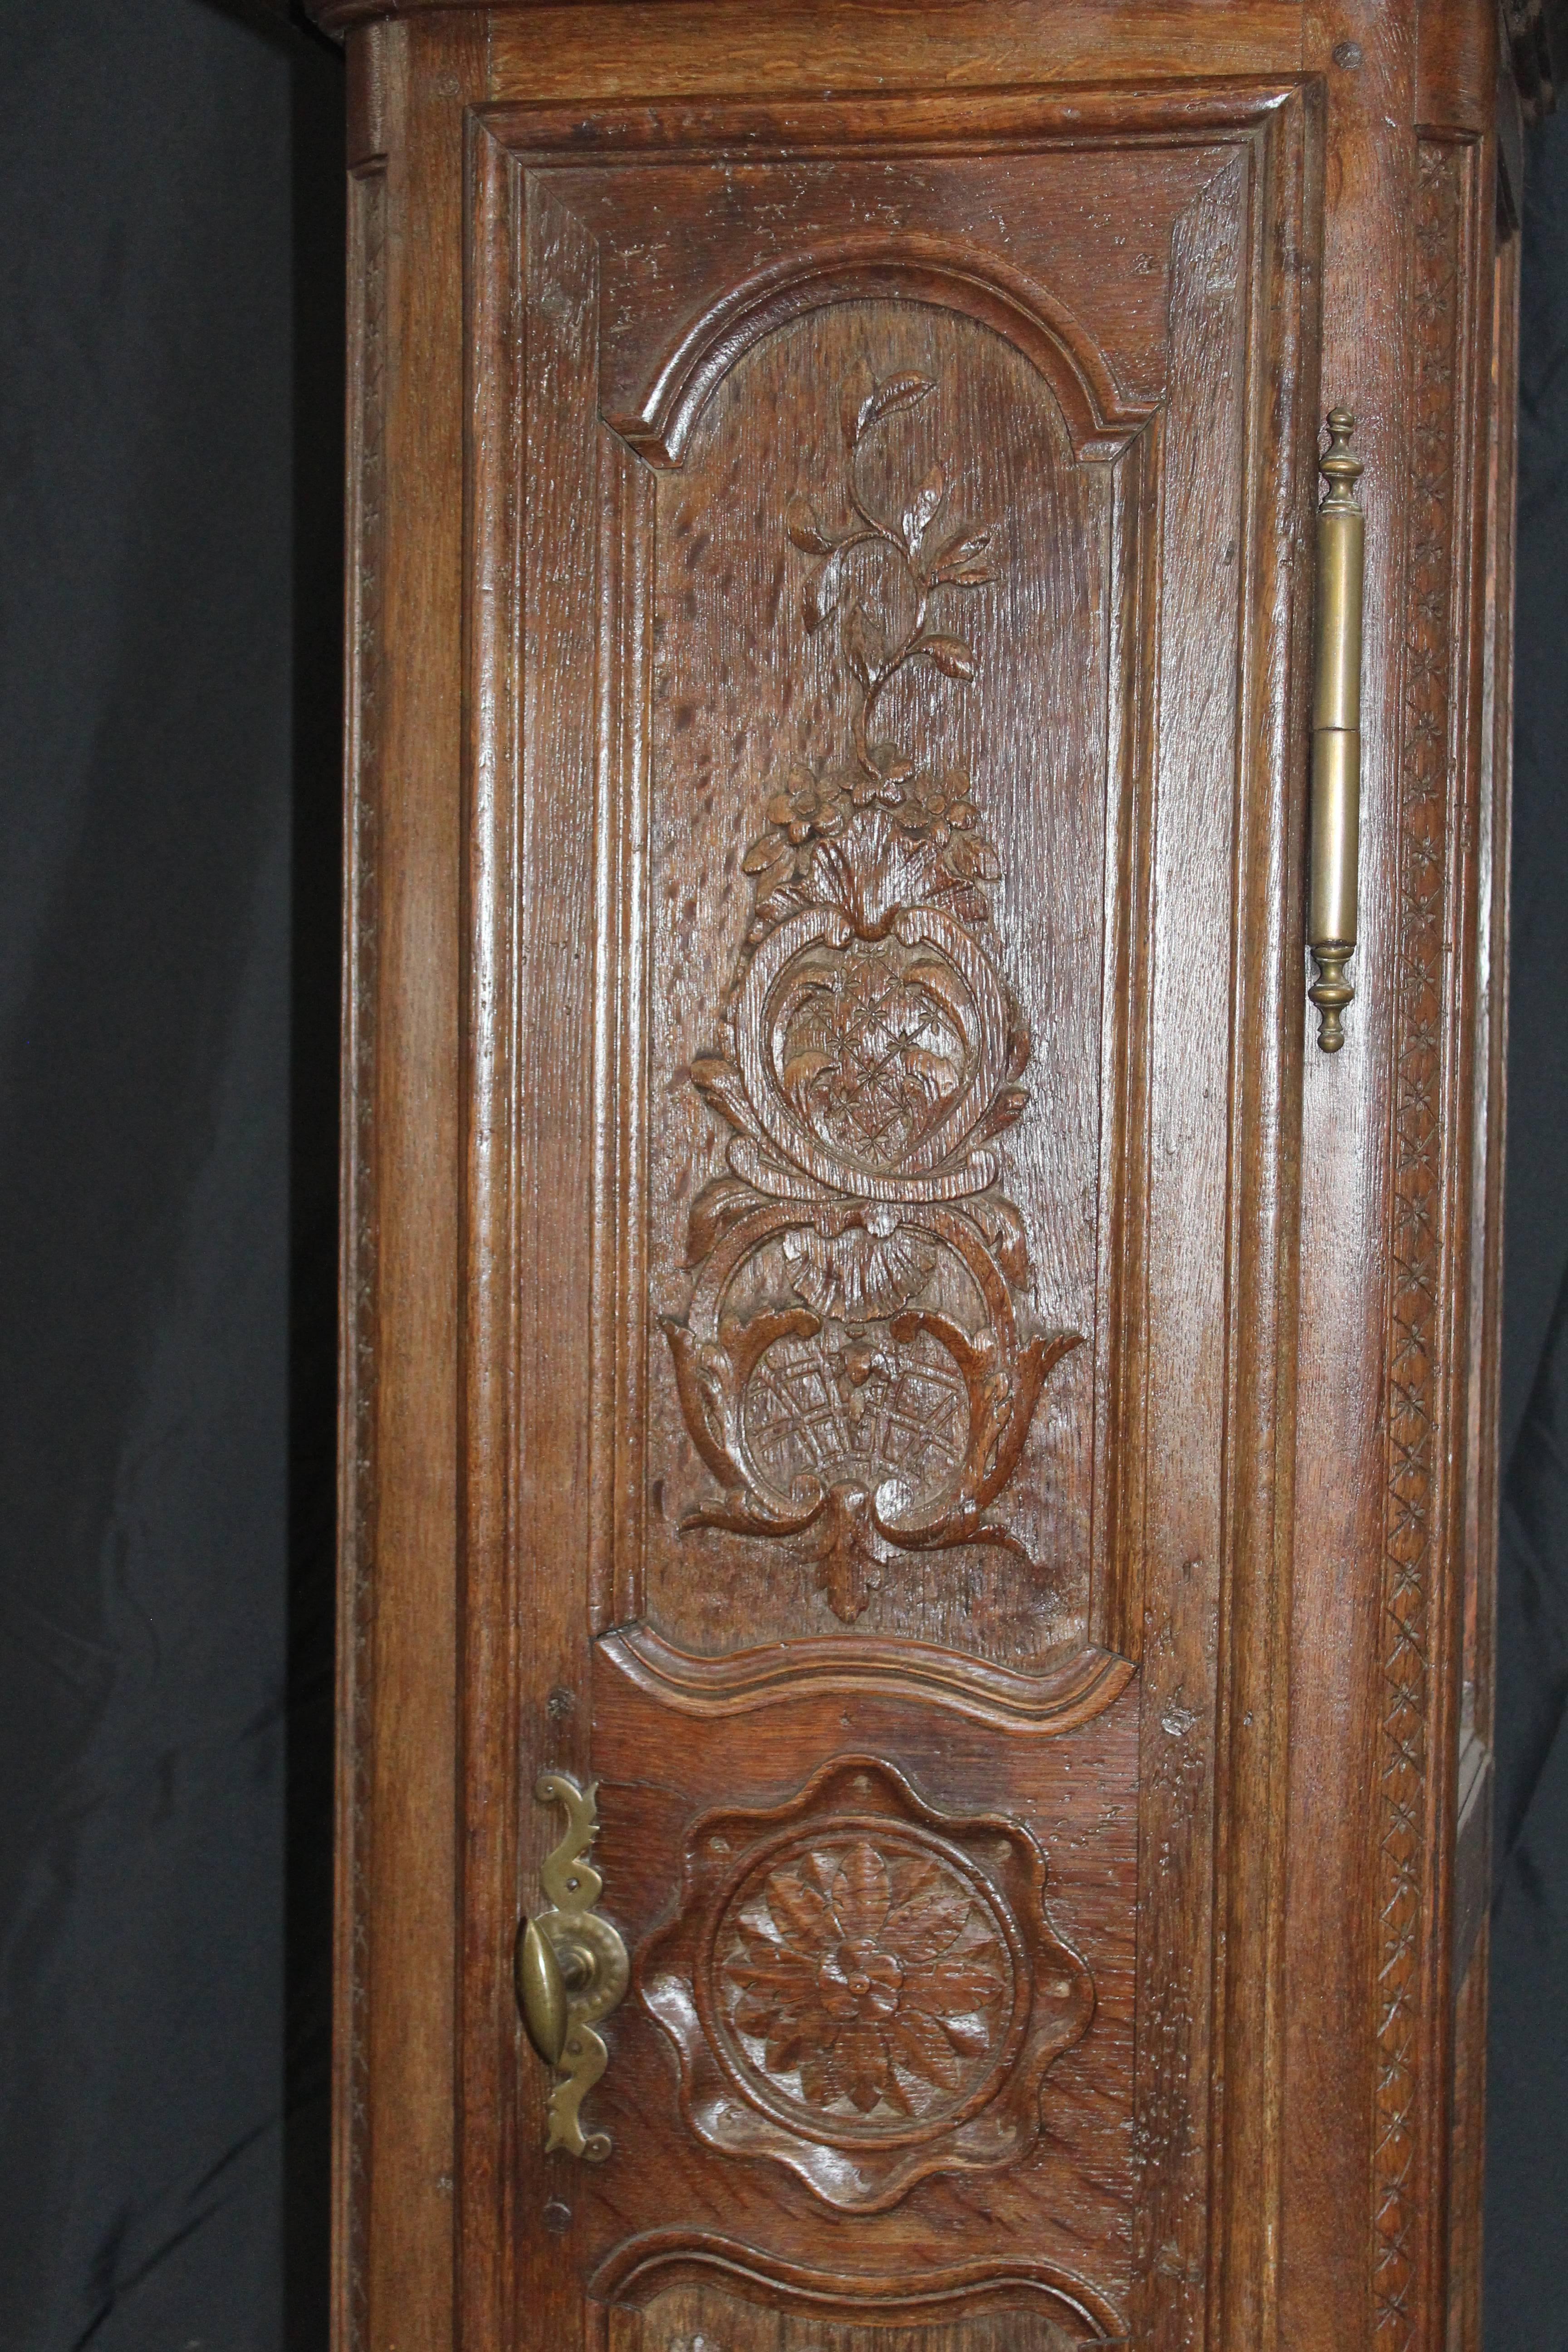 Nice tall French tall clock case in oak 
The date on the clock shows 1780 with the name off the fabricator or for the person
The clock is complete with weights and slinger but not working for the moment
Very fine carving all over the clock case
